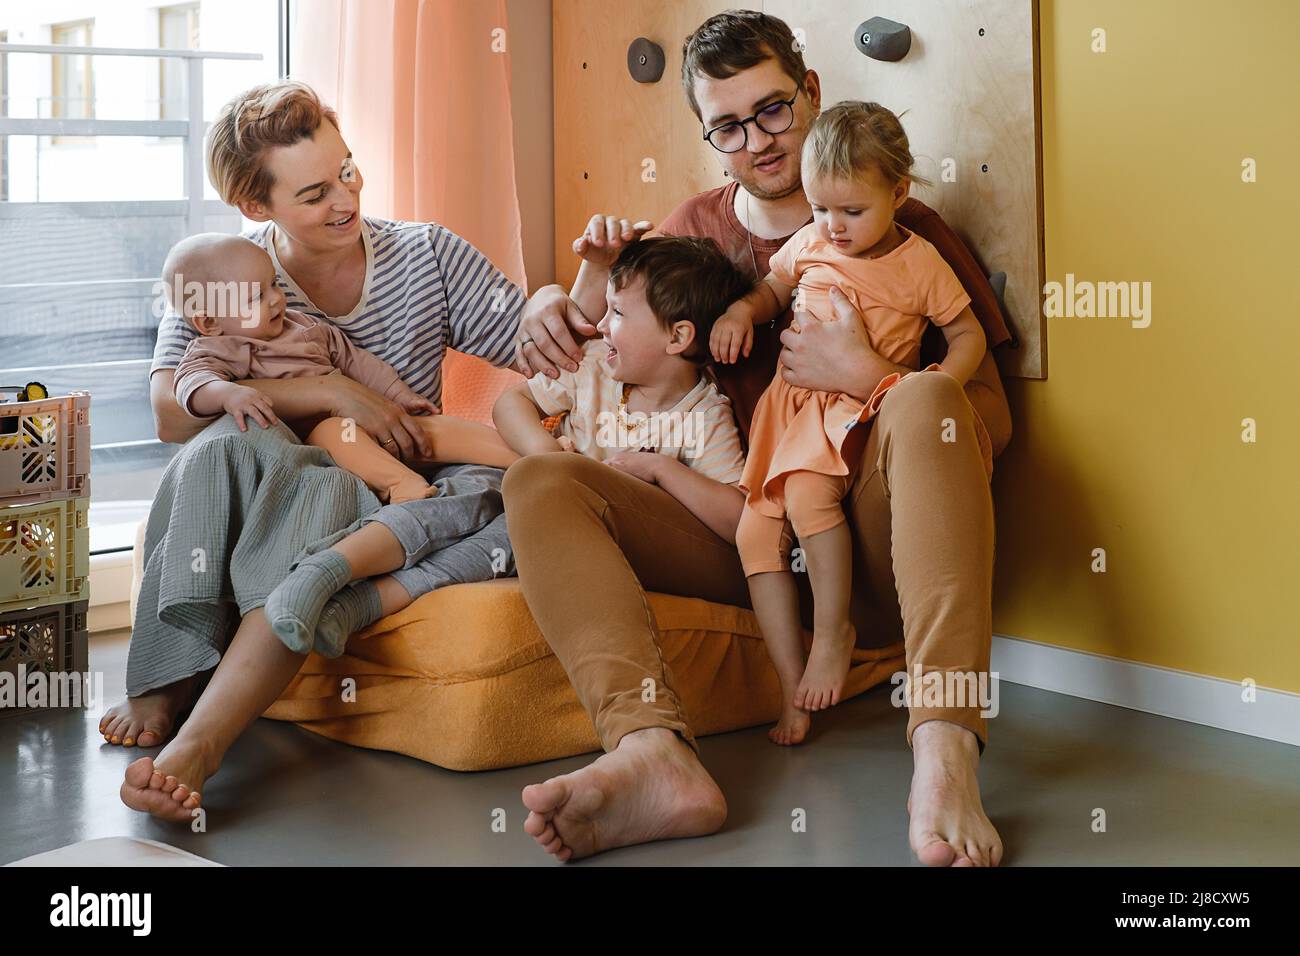 Big family in sunny play room. Parents playing with kids and toys. Happy time together with games. Mother father son daughters at modern colorful home Stock Photo